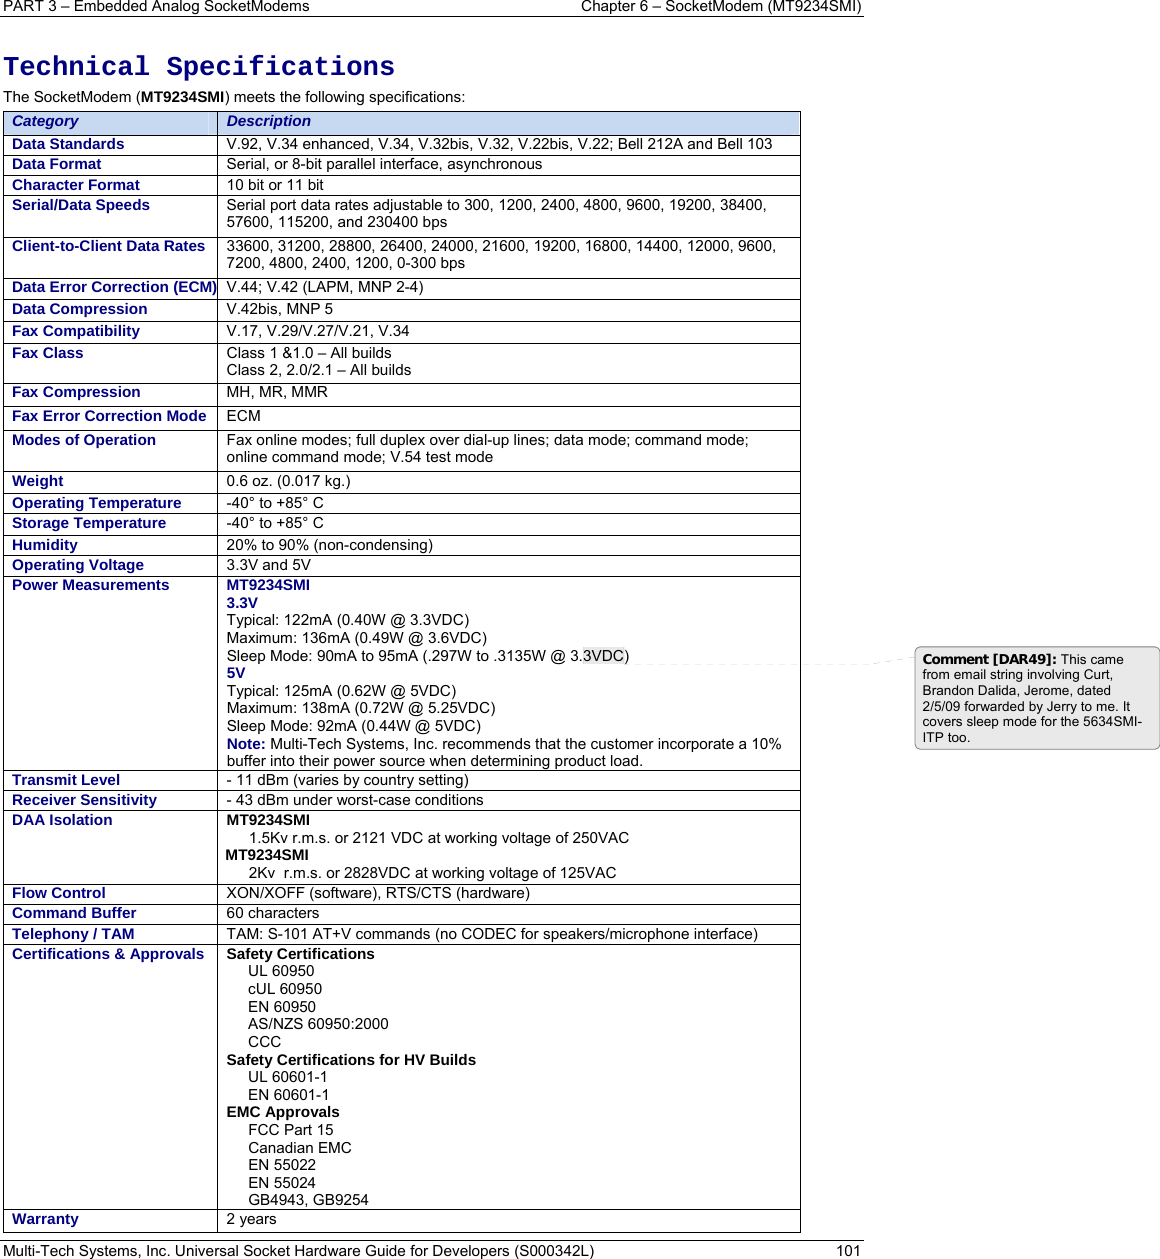 PART 3 – Embedded Analog SocketModems  Chapter 6 – SocketModem (MT9234SMI) Multi-Tech Systems, Inc. Universal Socket Hardware Guide for Developers (S000342L)  101   Technical Specifications  The SocketModem (MT9234SMI) meets the following specifications:  Category  Description Data Standards  V.92, V.34 enhanced, V.34, V.32bis, V.32, V.22bis, V.22; Bell 212A and Bell 103 Data Format  Serial, or 8-bit parallel interface, asynchronous Character Format  10 bit or 11 bit Serial/Data Speeds   Serial port data rates adjustable to 300, 1200, 2400, 4800, 9600, 19200, 38400, 57600, 115200, and 230400 bps Client-to-Client Data Rates  33600, 31200, 28800, 26400, 24000, 21600, 19200, 16800, 14400, 12000, 9600, 7200, 4800, 2400, 1200, 0-300 bps Data Error Correction (ECM) V.44; V.42 (LAPM, MNP 2-4) Data Compression  V.42bis, MNP 5 Fax Compatibility  V.17, V.29/V.27/V.21, V.34  Fax Class  Class 1 &amp;1.0 – All builds Class 2, 2.0/2.1 – All builds Fax Compression  MH, MR, MMR  Fax Error Correction Mode  ECM Modes of Operation  Fax online modes; full duplex over dial-up lines; data mode; command mode; online command mode; V.54 test mode Weight  0.6 oz. (0.017 kg.)  Operating Temperature   -40° to +85° C   Storage Temperature  -40° to +85° C    Humidity  20% to 90% (non-condensing)  Operating Voltage  3.3V and 5V Power Measurements   MT9234SMI   3.3V  Typical: 122mA (0.40W @ 3.3VDC)  Maximum: 136mA (0.49W @ 3.6VDC) Sleep Mode: 90mA to 95mA (.297W to .3135W @ 3.3VDC) 5V Typical: 125mA (0.62W @ 5VDC) Maximum: 138mA (0.72W @ 5.25VDC)  Sleep Mode: 92mA (0.44W @ 5VDC) Note: Multi-Tech Systems, Inc. recommends that the customer incorporate a 10% buffer into their power source when determining product load. Transmit Level  - 11 dBm (varies by country setting) Receiver Sensitivity  - 43 dBm under worst-case conditions DAA Isolation   MT9234SMI  1.5Kv r.m.s. or 2121 VDC at working voltage of 250VAC MT9234SMI   2Kv  r.m.s. or 2828VDC at working voltage of 125VAC Flow Control  XON/XOFF (software), RTS/CTS (hardware) Command Buffer  60 characters Telephony / TAM    TAM: S-101 AT+V commands (no CODEC for speakers/microphone interface) Certifications &amp; Approvals  Safety Certifications UL 60950 cUL 60950 EN 60950 AS/NZS 60950:2000  CCC Safety Certifications for HV Builds UL 60601-1 EN 60601-1 EMC Approvals FCC Part 15  Canadian EMC EN 55022  EN 55024 GB4943, GB9254 Warranty   2 years Comment [DAR49]: This came from email string involving Curt, Brandon Dalida, Jerome, dated 2/5/09 forwarded by Jerry to me. It covers sleep mode for the 5634SMI-ITP too. 